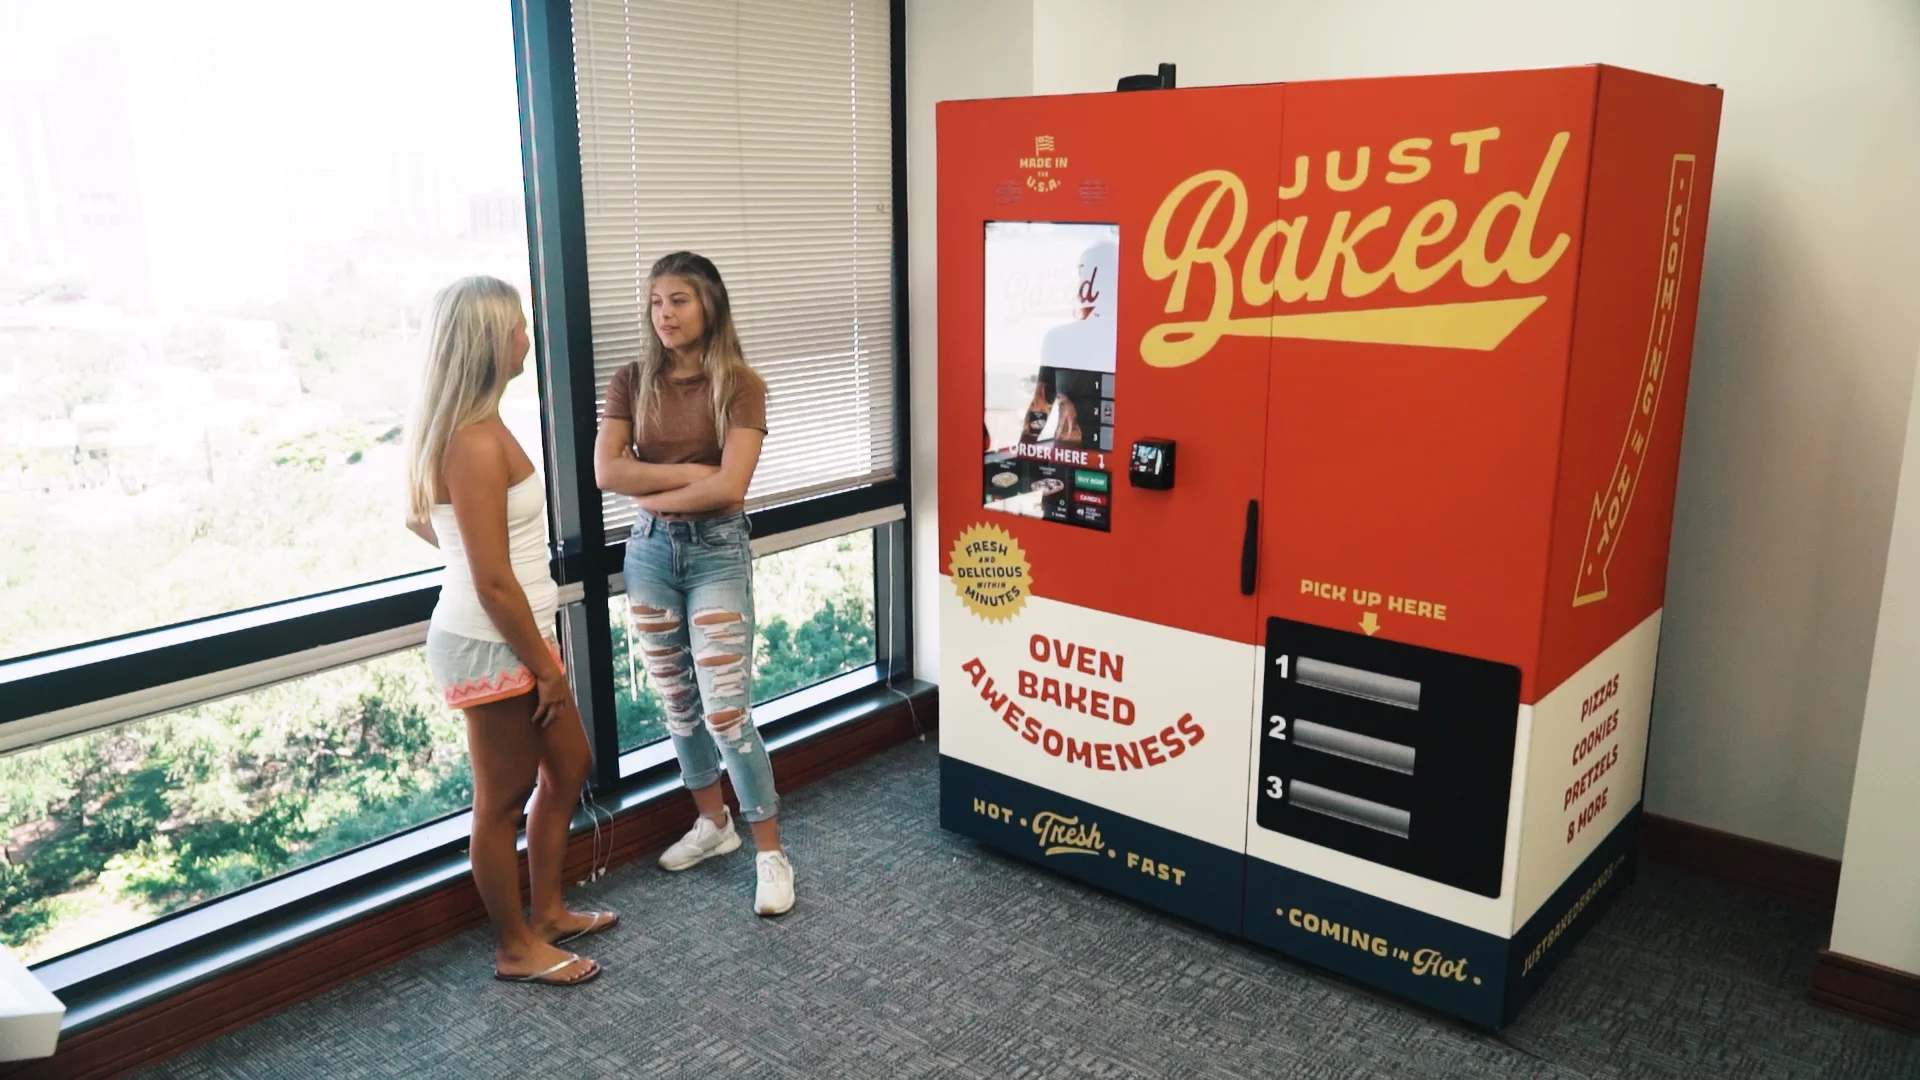 Introducing the Just Baked Kiosk - Art